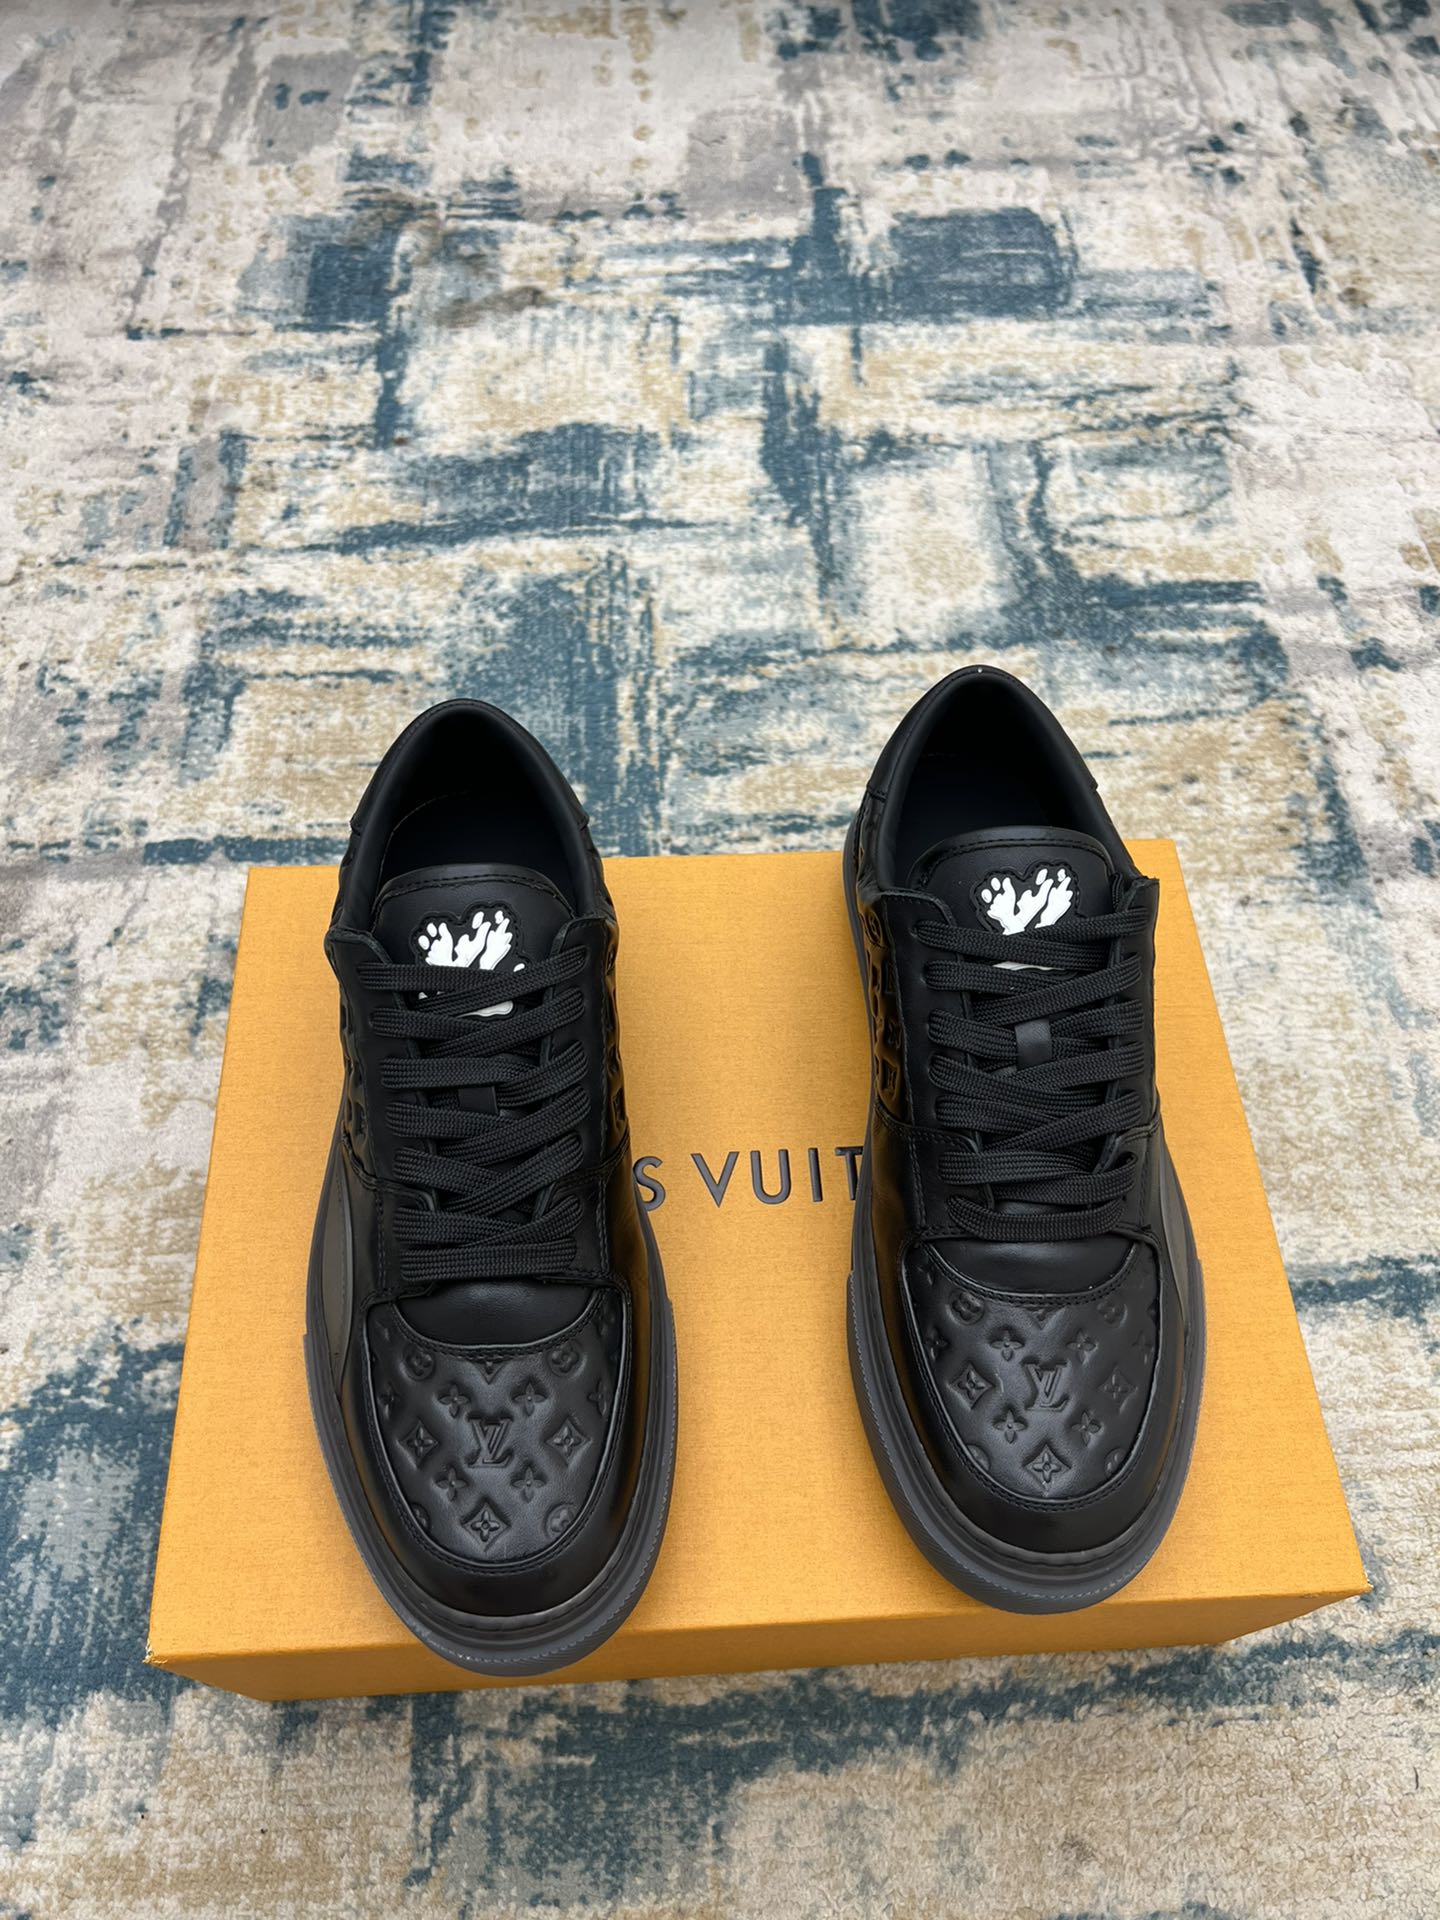 Louis Vuitton AAAAA+
 Sneakers Casual Shoes Men Cowhide Rubber Casual